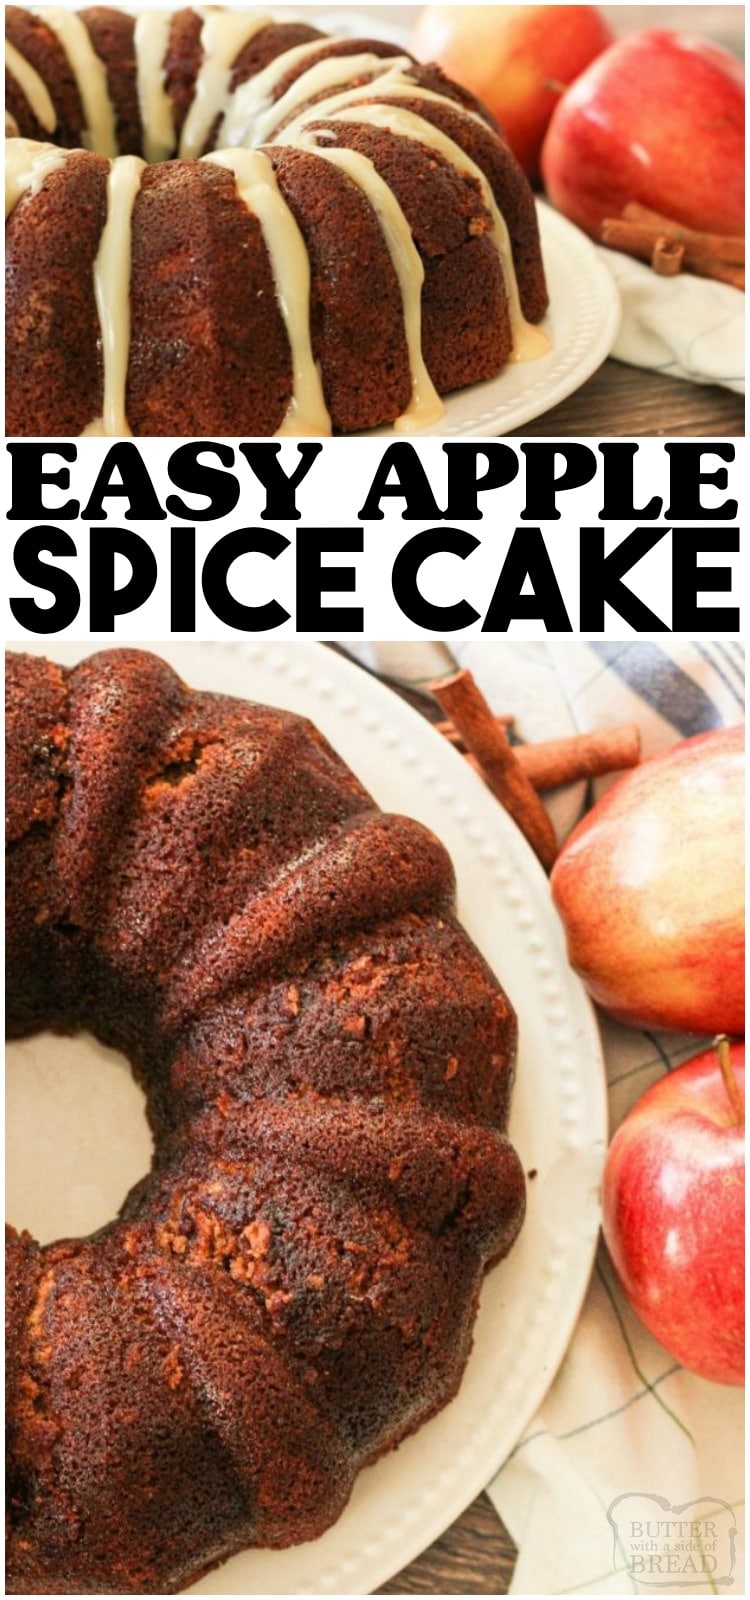 Apple Spice Cake is a deliciously, moist cake made with fresh apples, applesauce, a blend of perfect spices topped with a caramel glaze! Lovely apple cake perfect for Fall baking. #cake #apples #applecake #baking #bundtcake #dessert #recipe from BUTTER WITH A SIDE OF BREAD